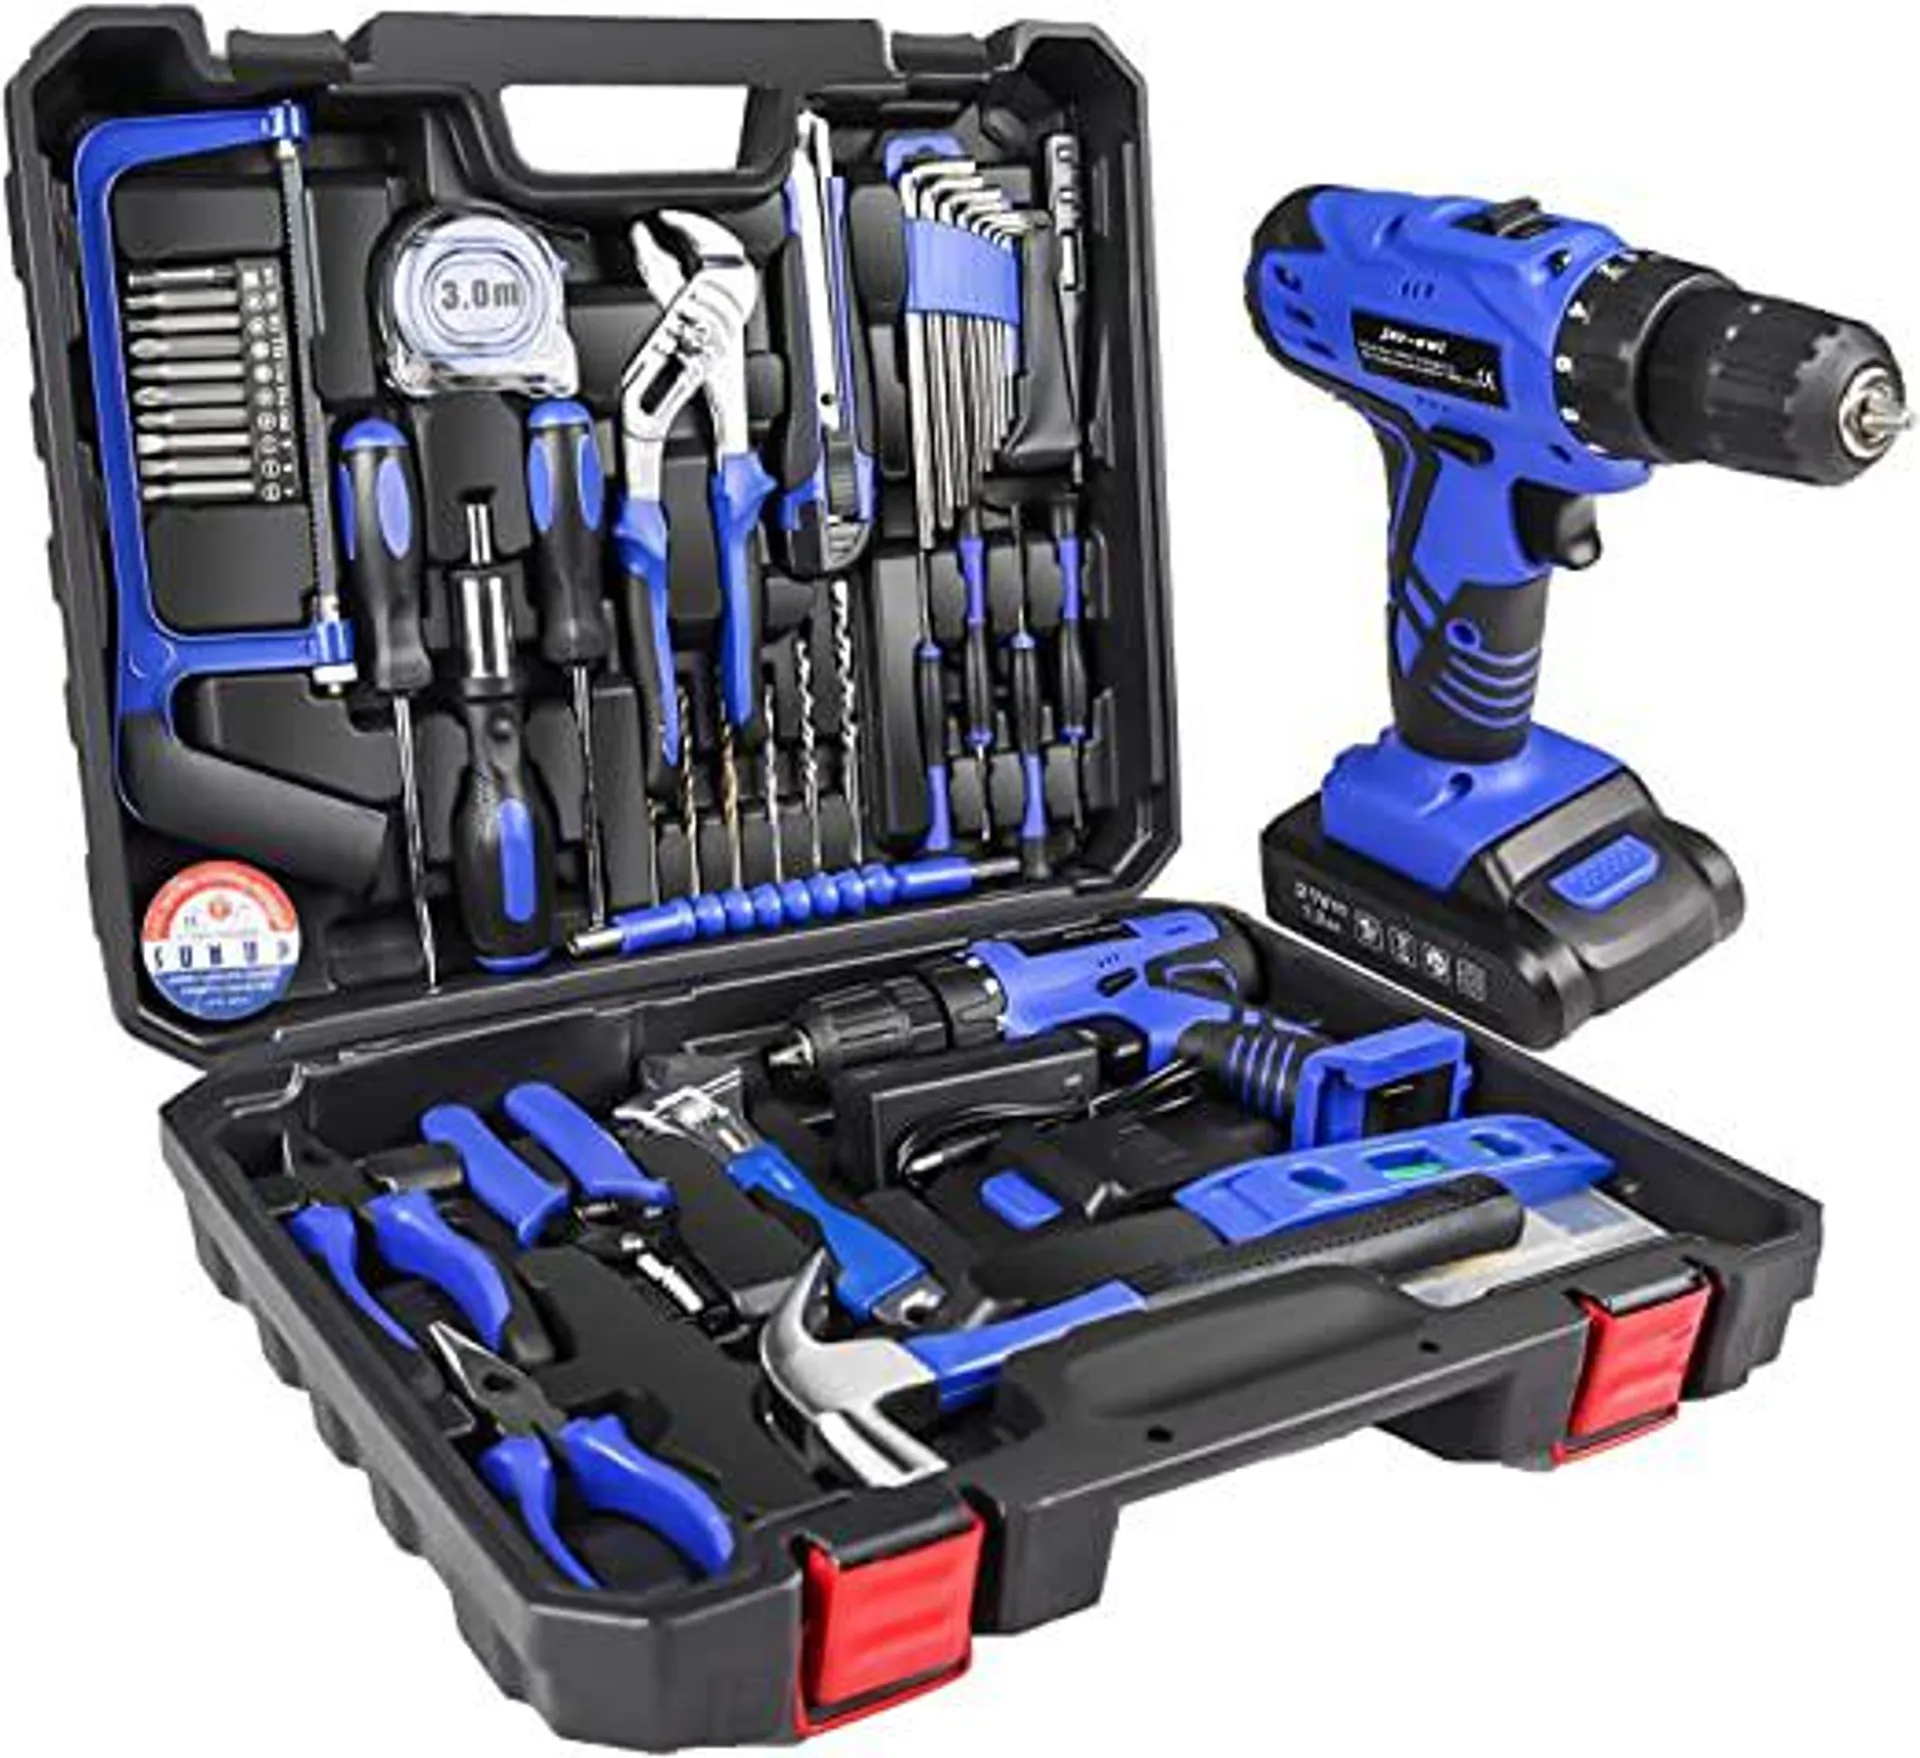 jar-owl 21V Tool Set with Drill, 350 in-lb Torque, 0-1350RMP Variable Speed, 10MM 3/8'' Keyless Chuck, 18+1 Clutch, 1.5Ah Li-Ion Battery & Charger for Home Tool Kit